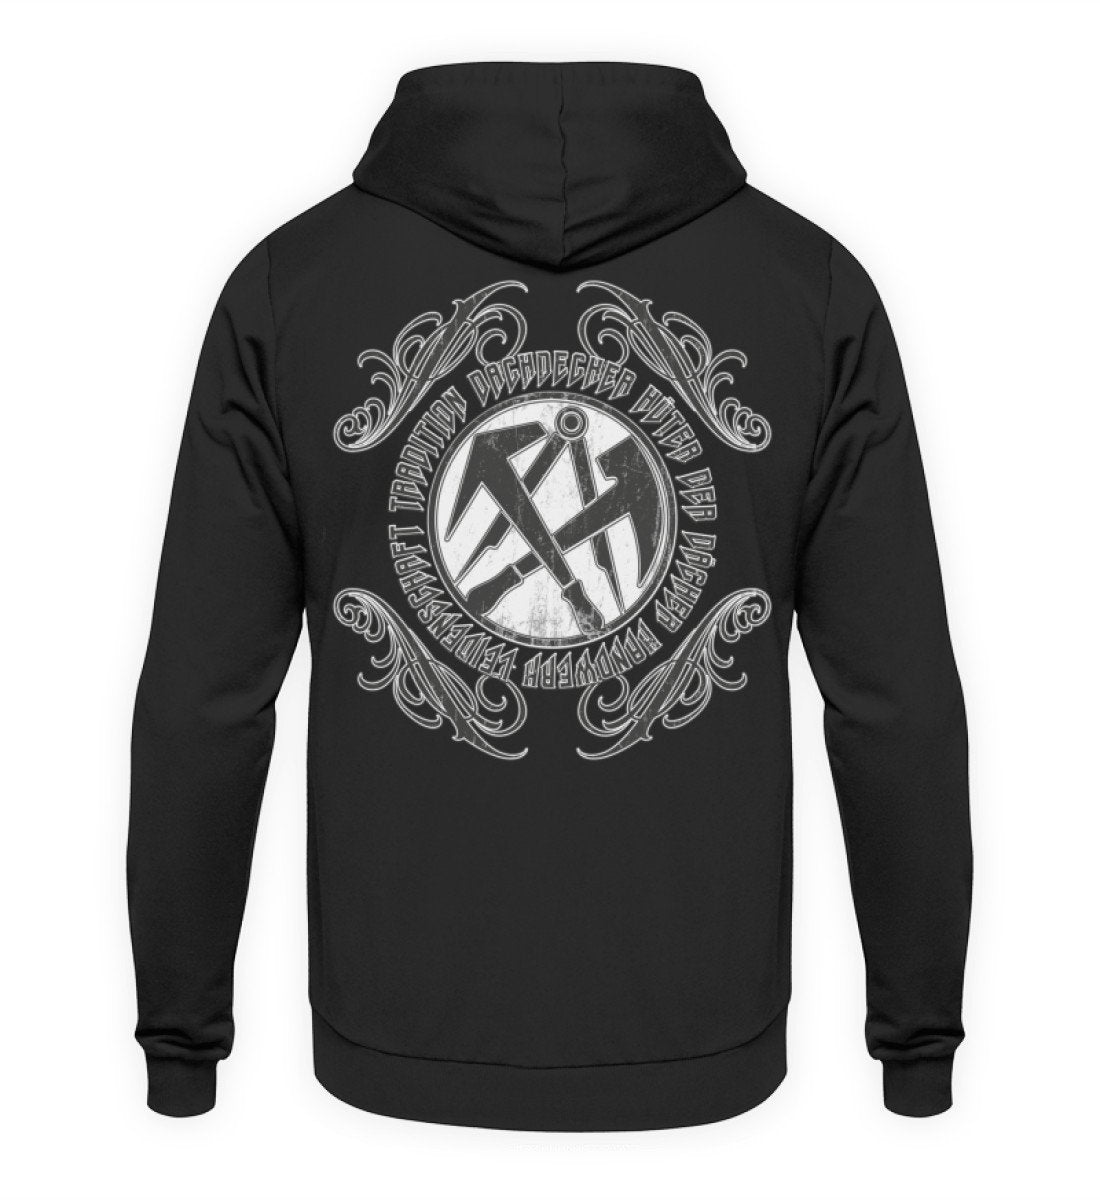 Keepers of the Roofs - Roofer Hoodie